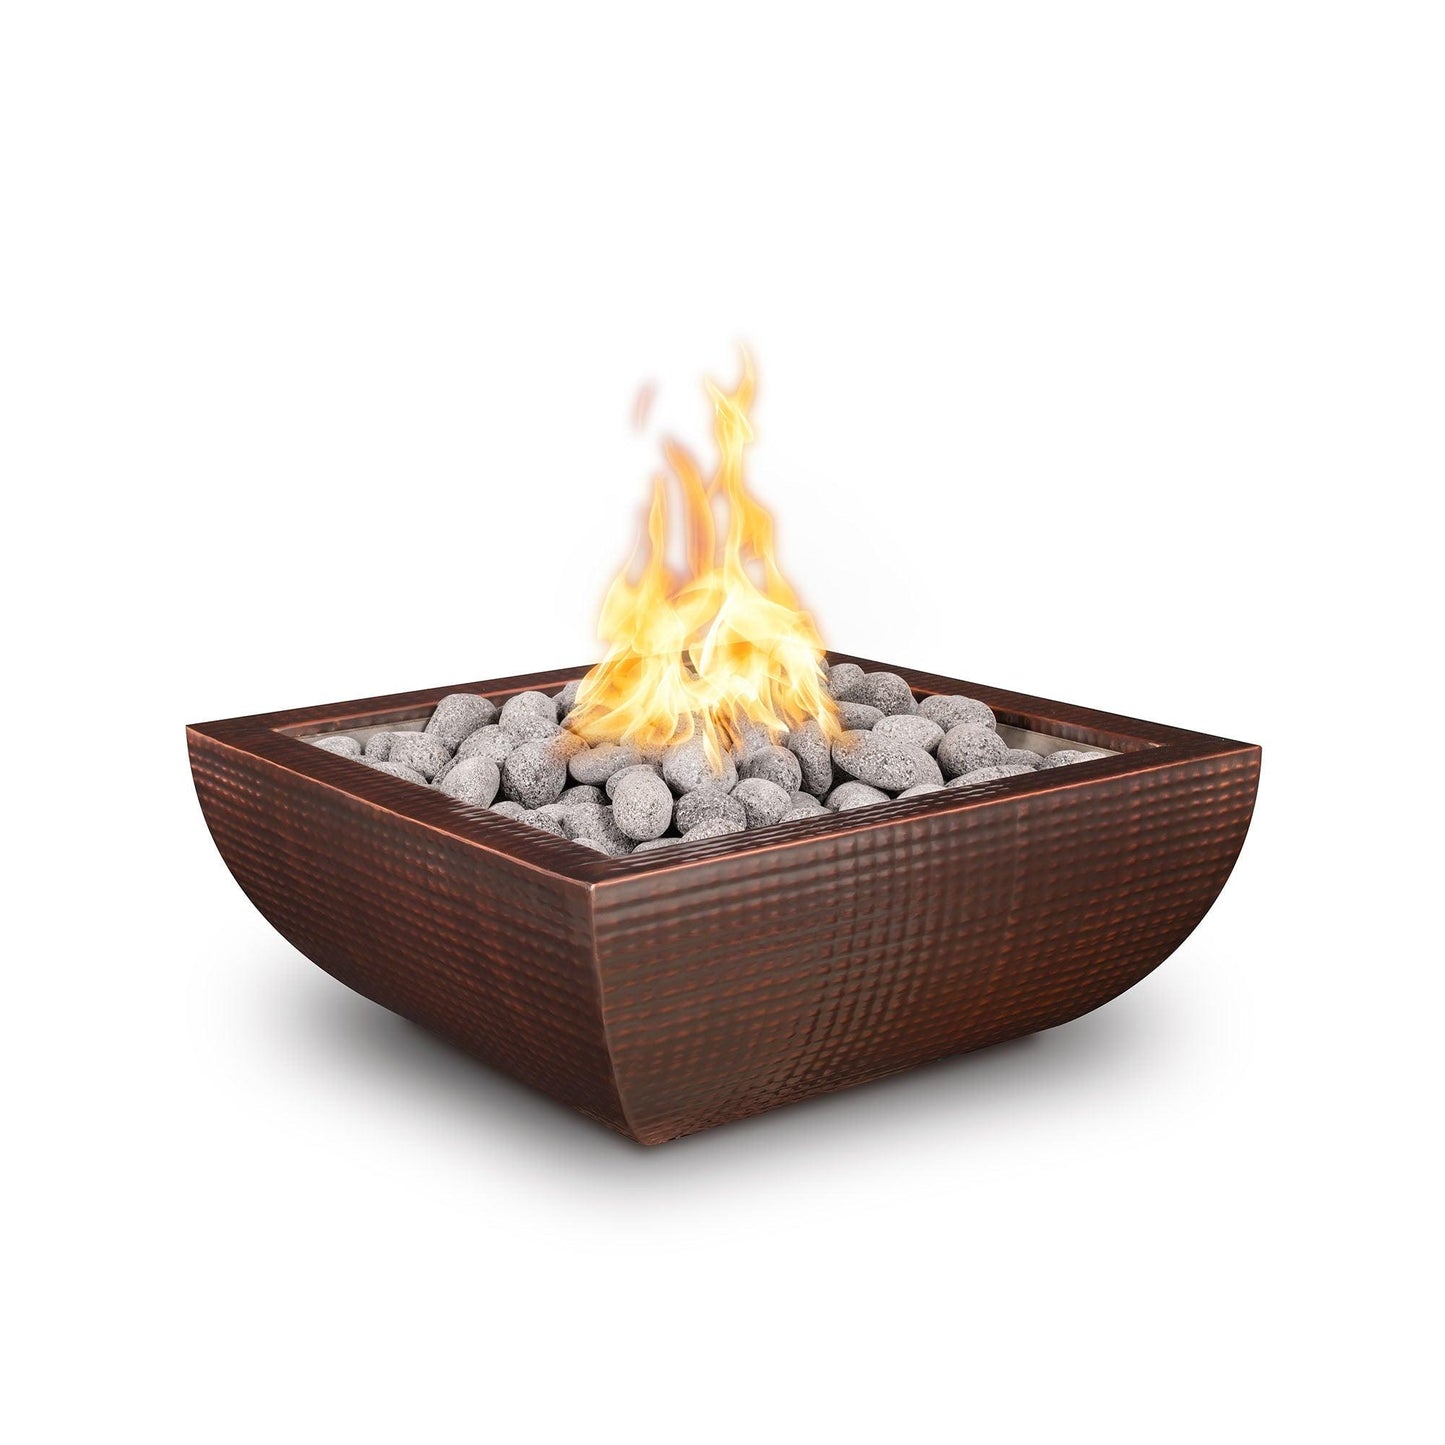 Avalon Fire Bowl Hammered Copper